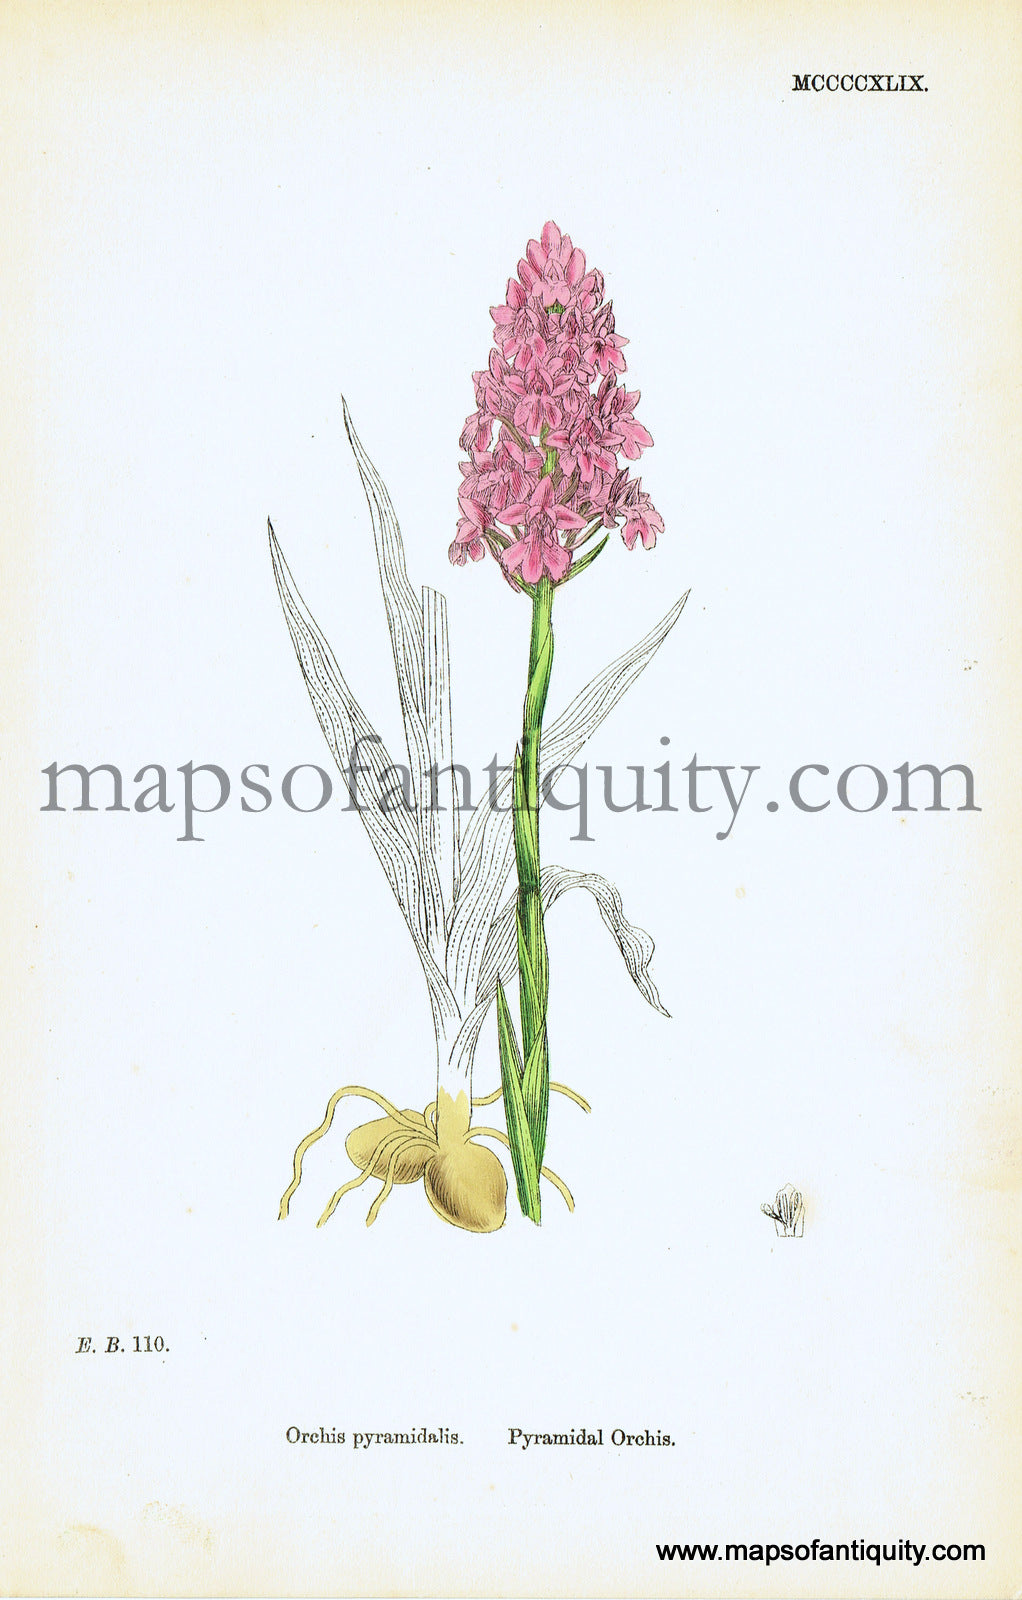 Antique-Hand-Colored-Print-Orchis-pyramidalis-Antique-Prints-Natural-History-Botanical-c.-1860-Sowerby-Maps-Of-Antiquity